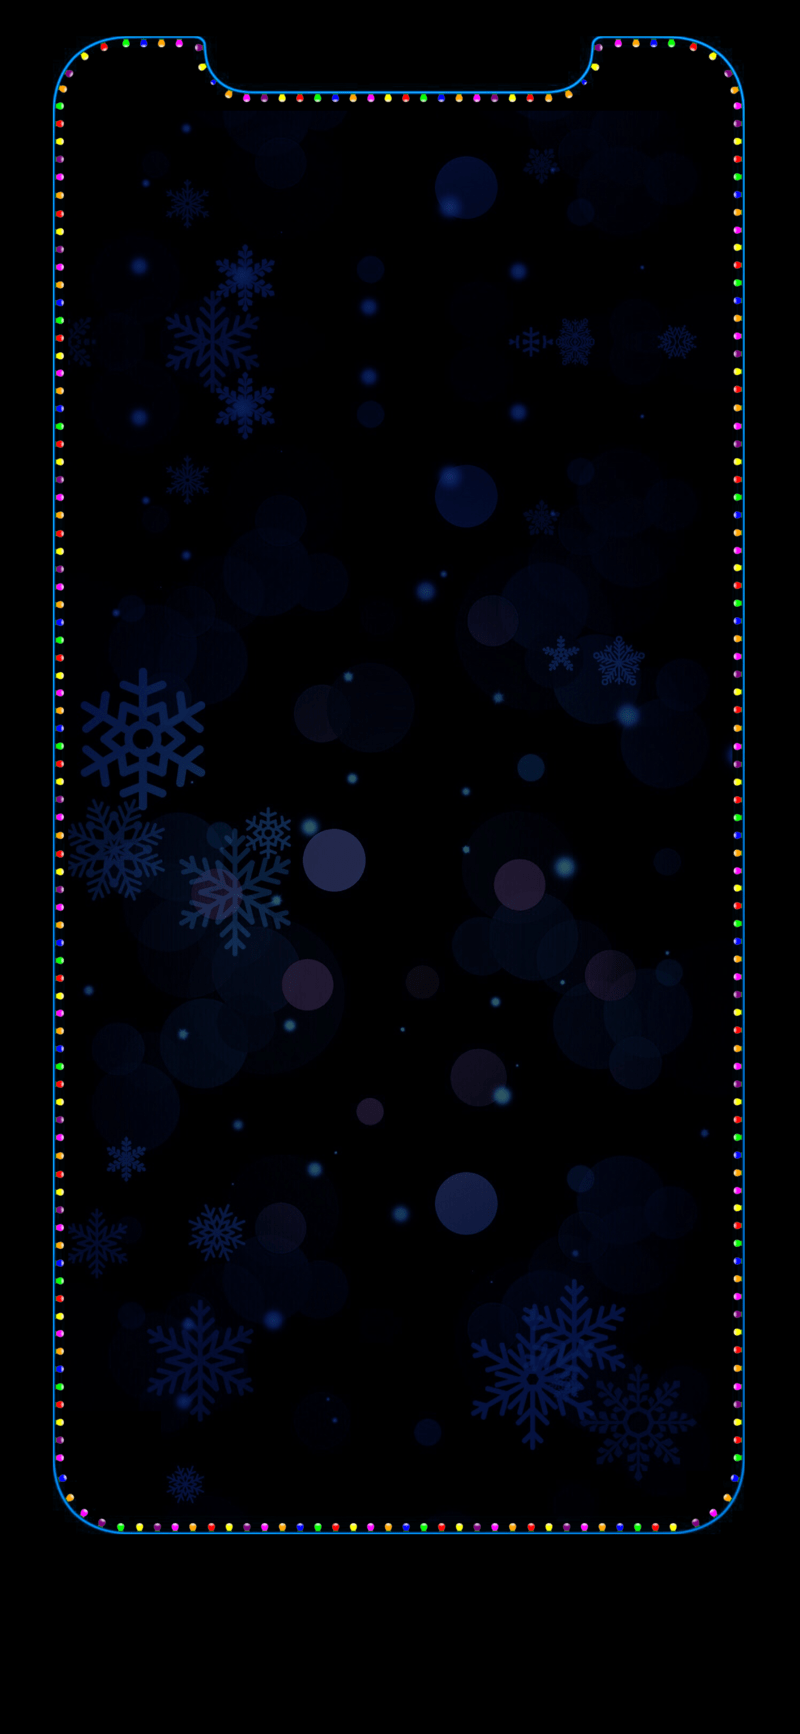 Christmas Wallpaper for iPhone XS MAX, XS, XR, X & Older Models